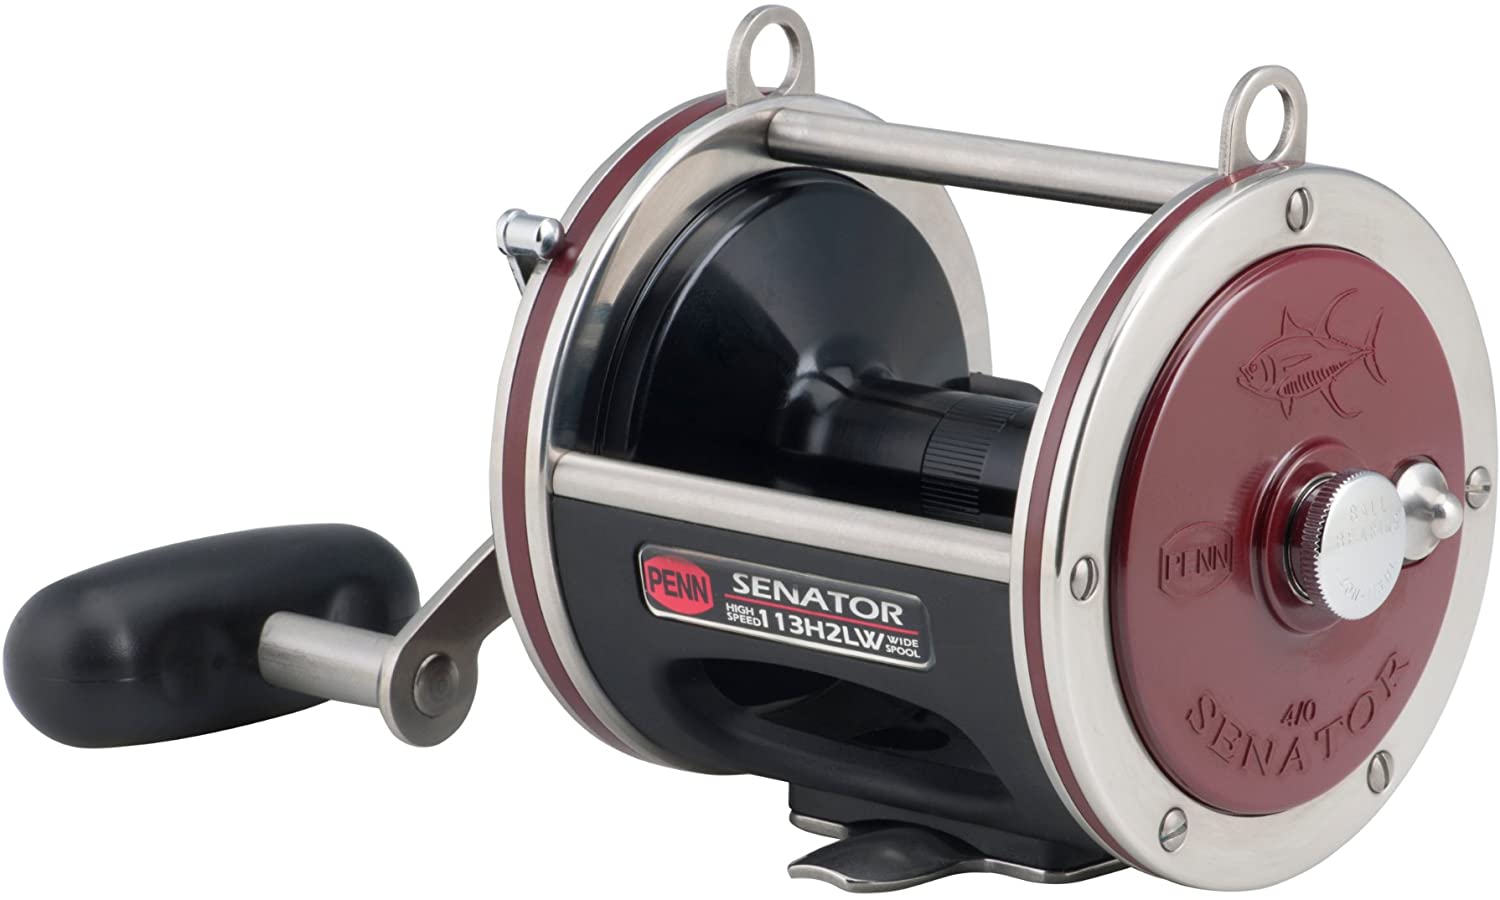 Shakespeare ATS Conventional Line Counter Fishing Reels